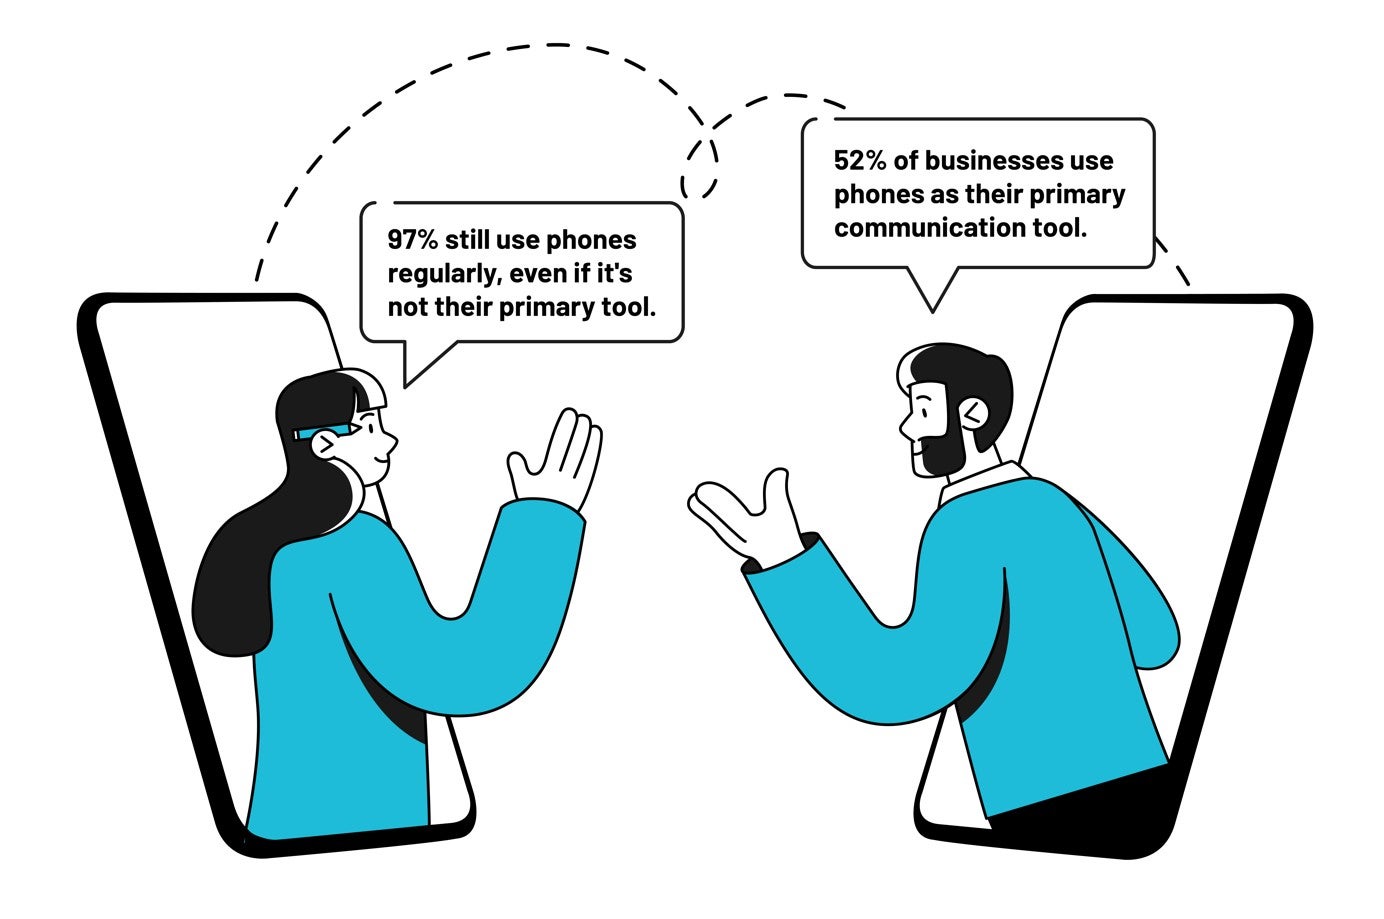 VoIP stats: 52% of businesses use phones as their primary form of communication.